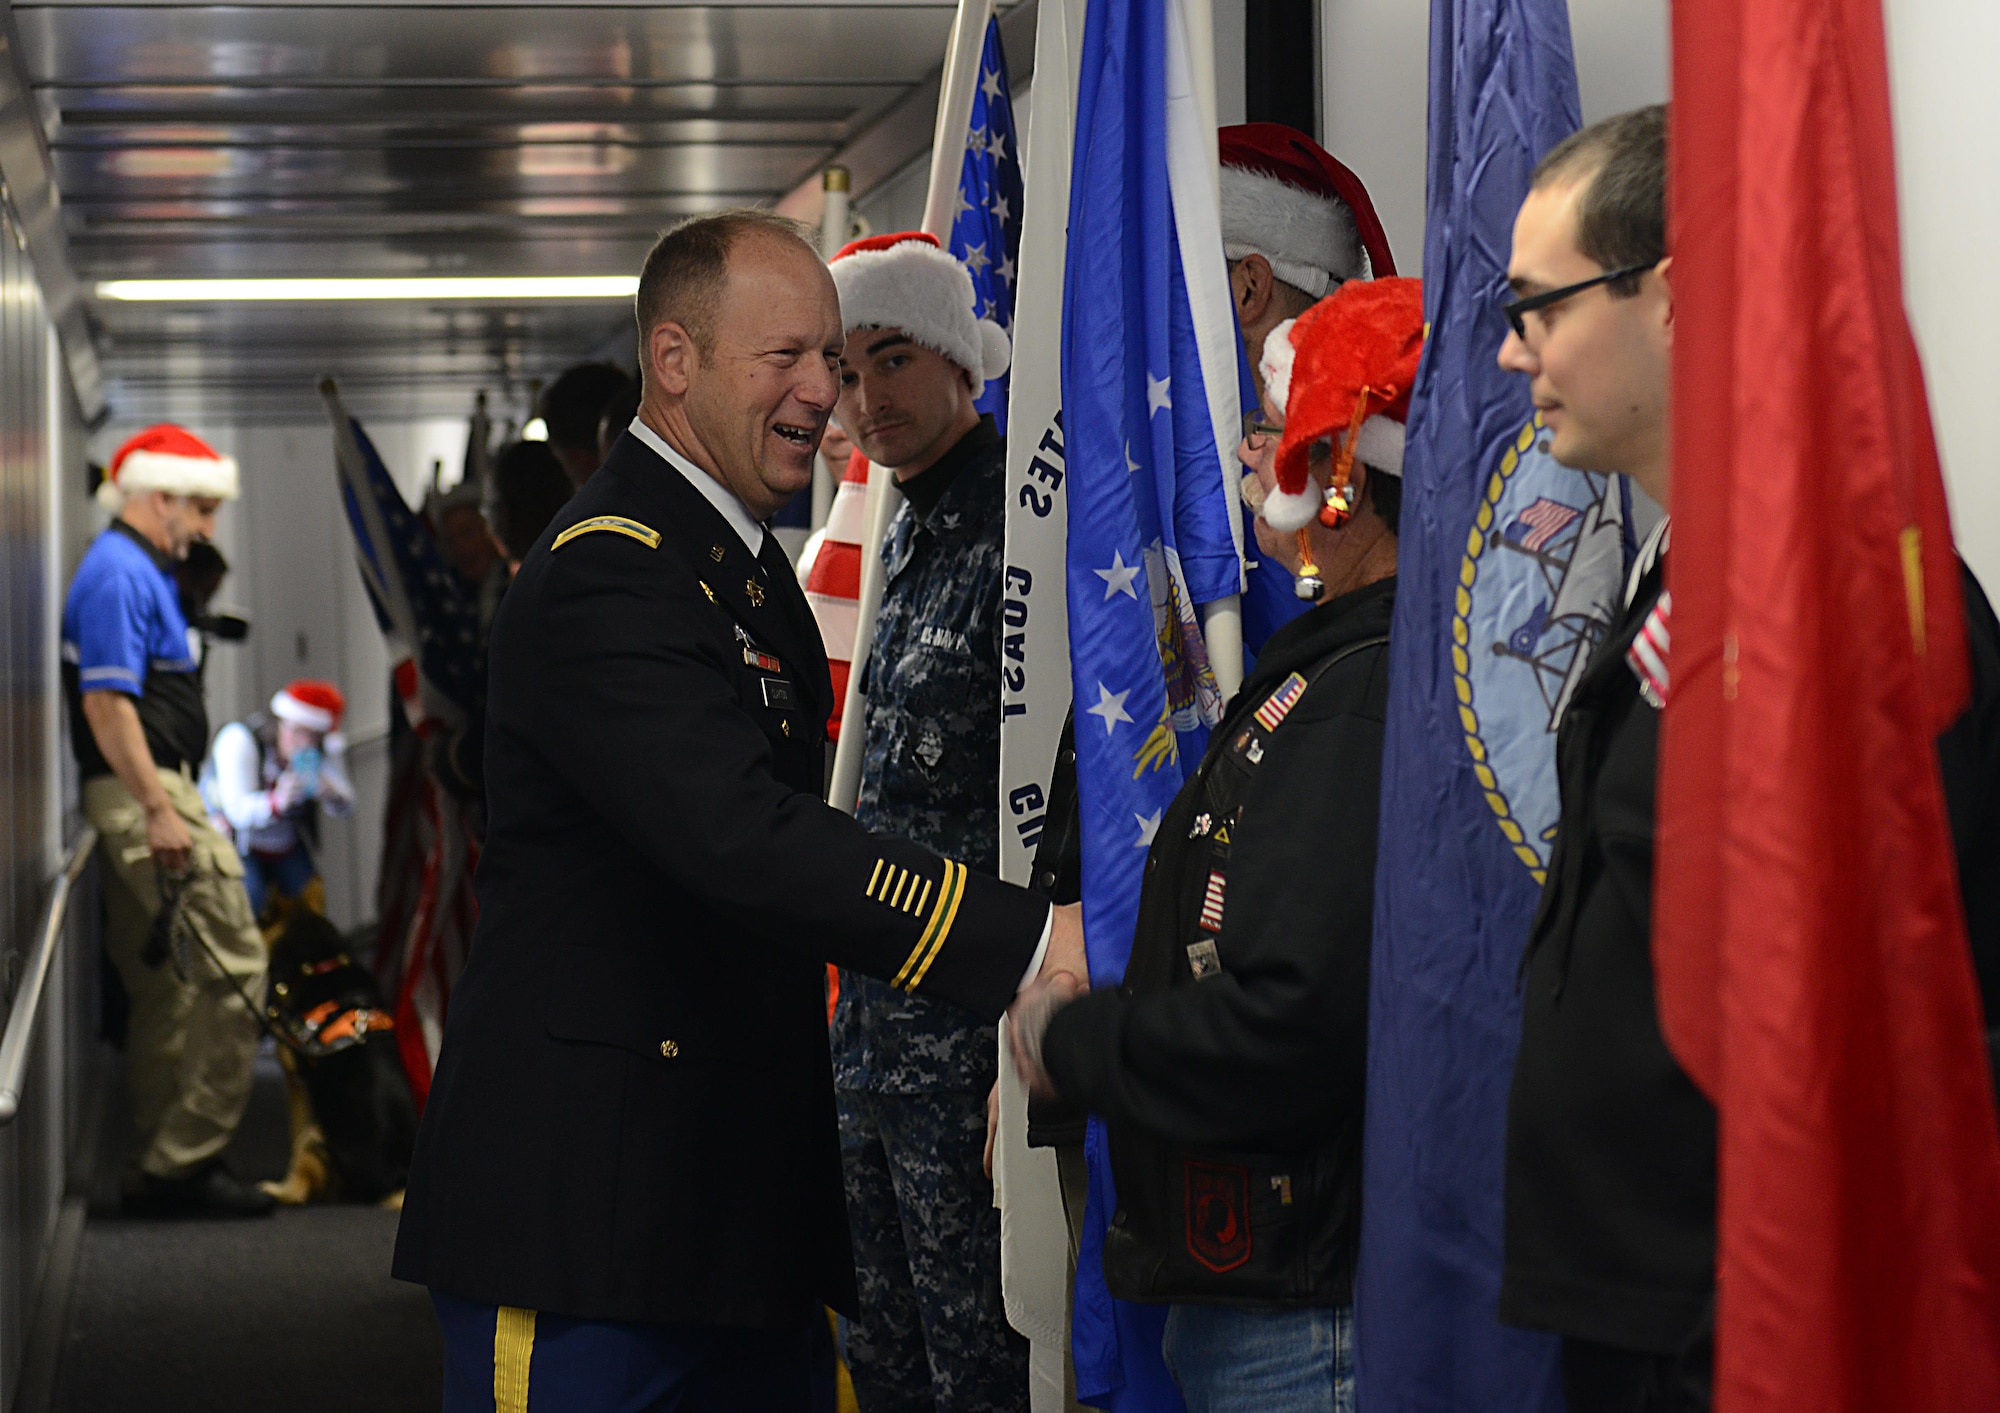 U.S. Army Col. Ralph Clayton III, 733rd Mission Support Group commander, thanks U.S. service members and the Virginia Patriot Guard for their participation in the Snowball Express at Norfolk International Airport, Va., Dec. 11, 2016. Since 2006, American Airlines and the Snowball Express have sent families to various locations during the holiday season to meet and spend time with other Gold Star families from around the world. (U.S. Air Force photo by Staff Sgt. Teresa J. Cleveland)